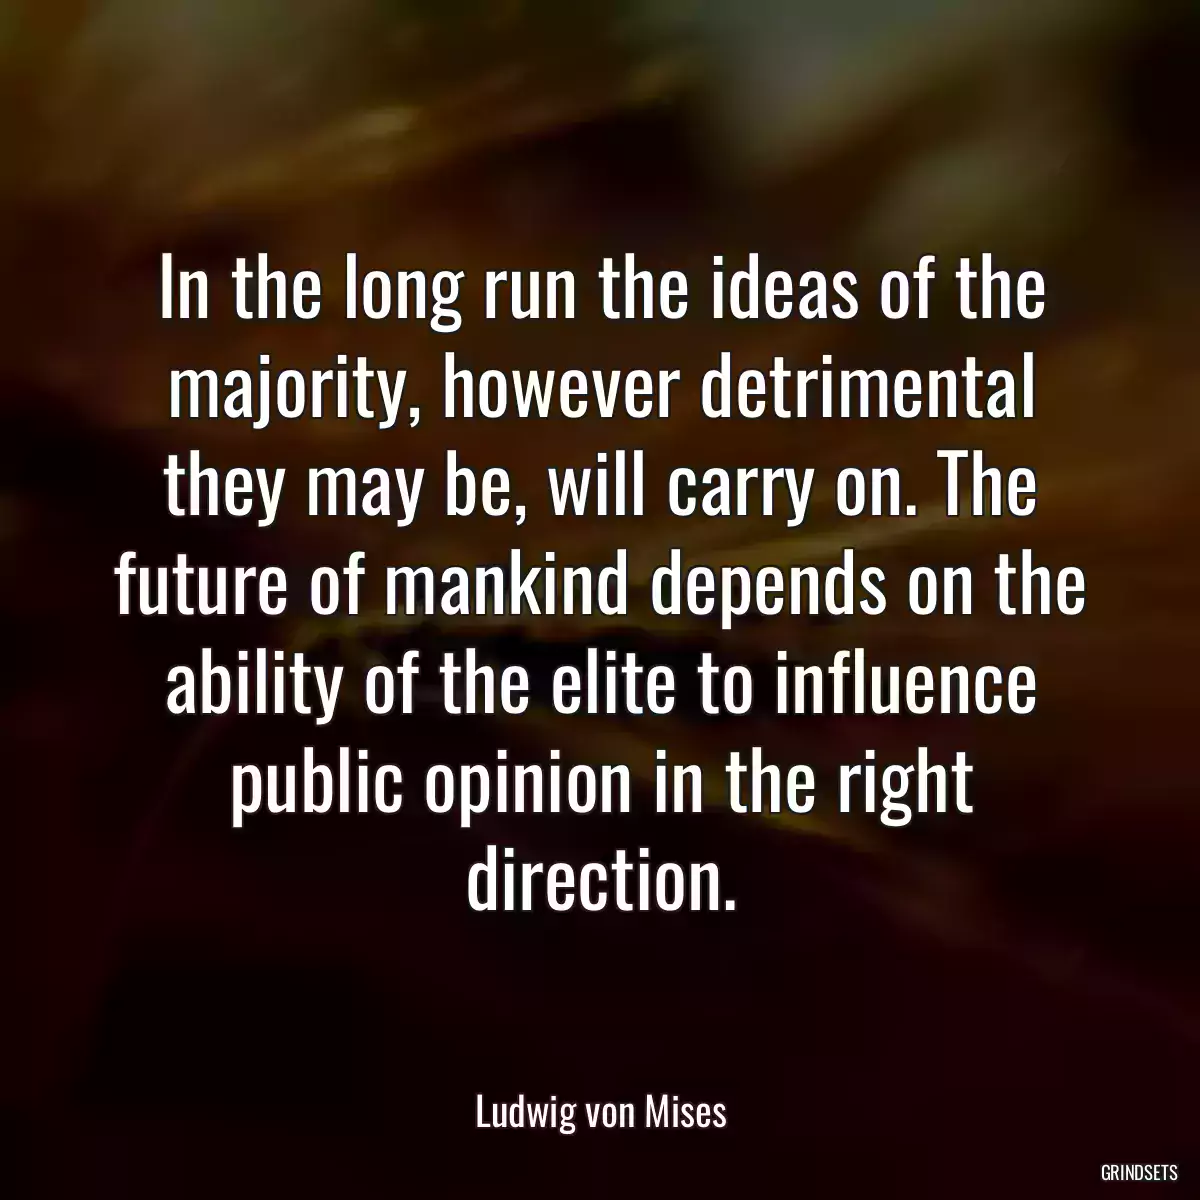 In the long run the ideas of the majority, however detrimental they may be, will carry on. The future of mankind depends on the ability of the elite to influence public opinion in the right direction.